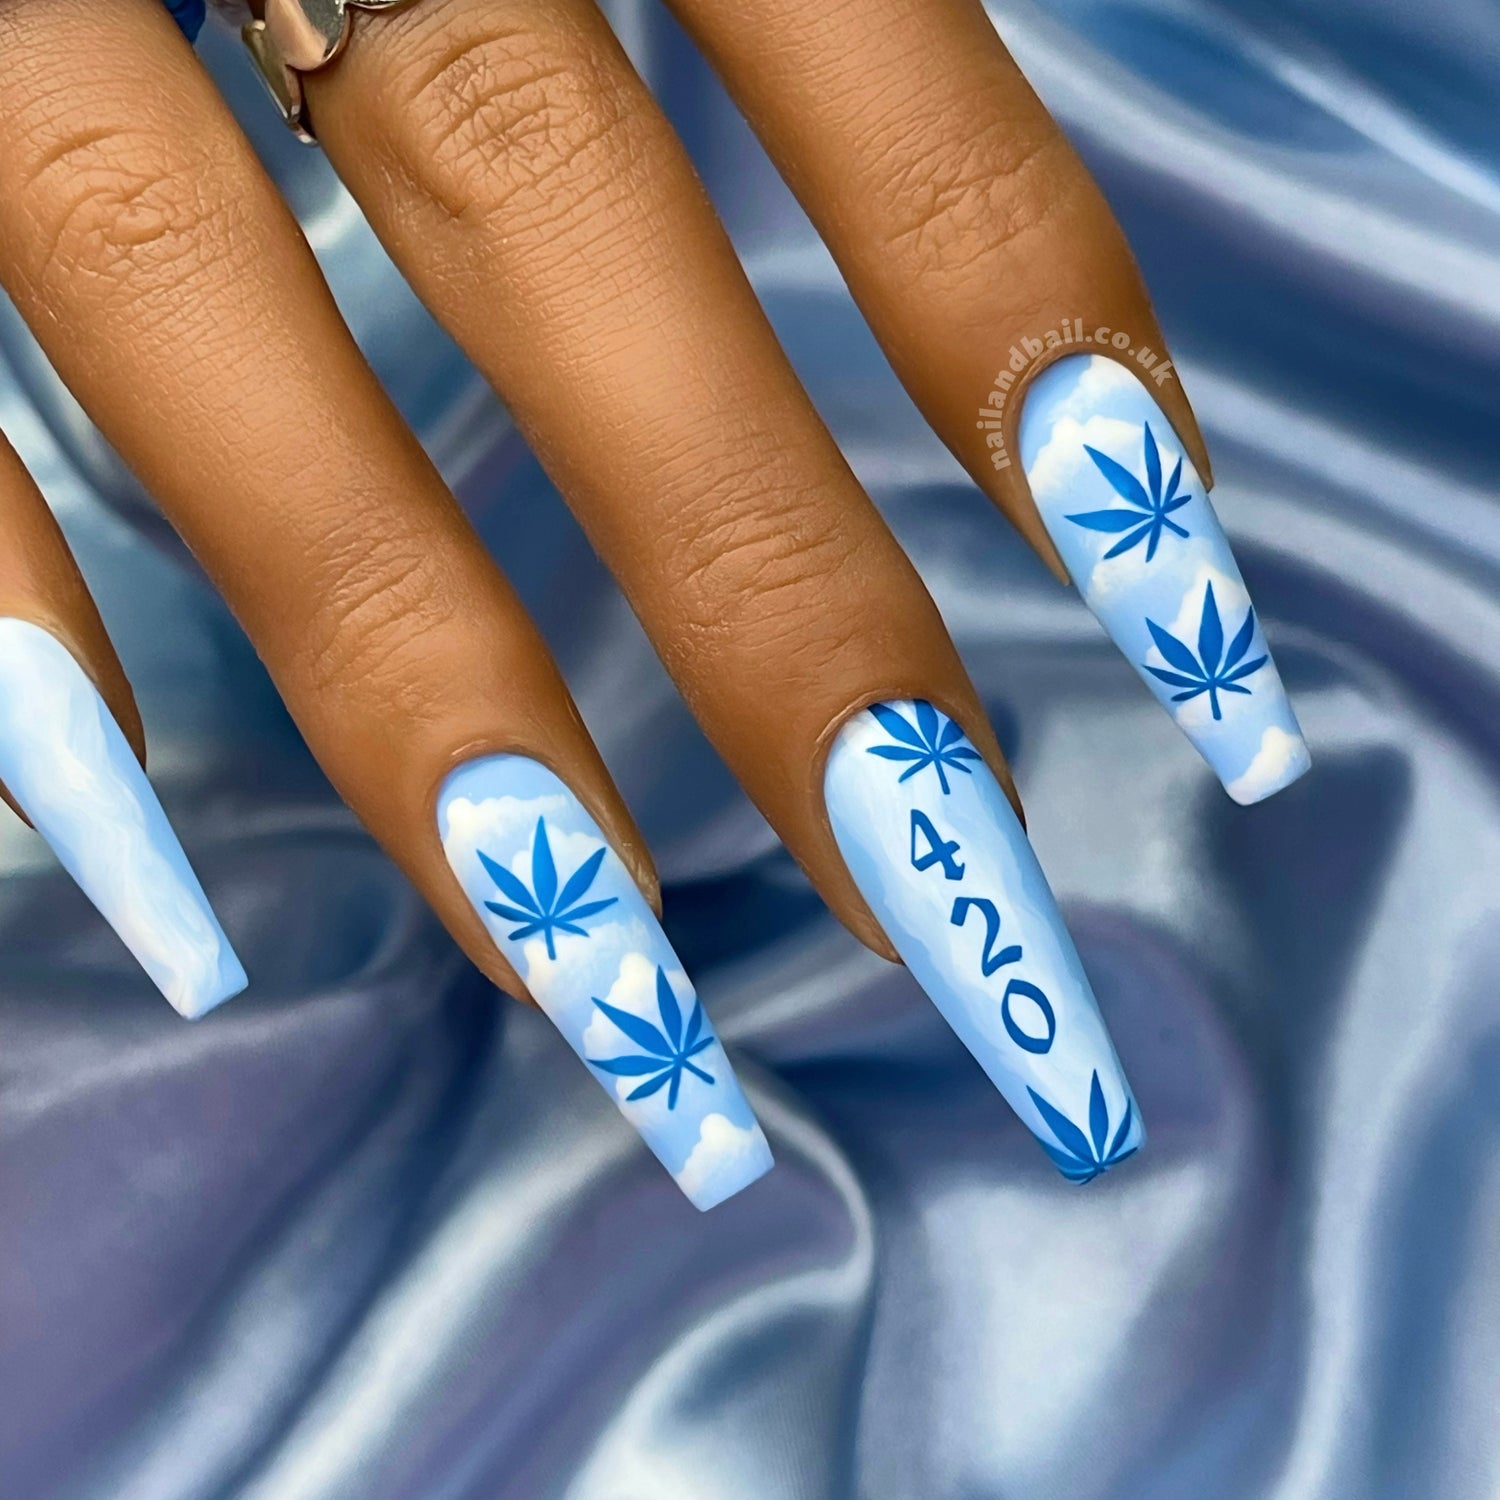 Ascend to new style heights with our "Sky High" press-on nails! Baby blue bases complement hand-painted white smoke on your thumbs and pinkies, while your pointer and ring fingers feature whimsical white clouds and dark blue weed leaves. And on your middle finger, make a bold statement with hand-painted white smoke, 420 numbers, and weed leaves. Finished with a matte top coat for a flawless finish, these nails are the ultimate in elevated style! 🍃💙